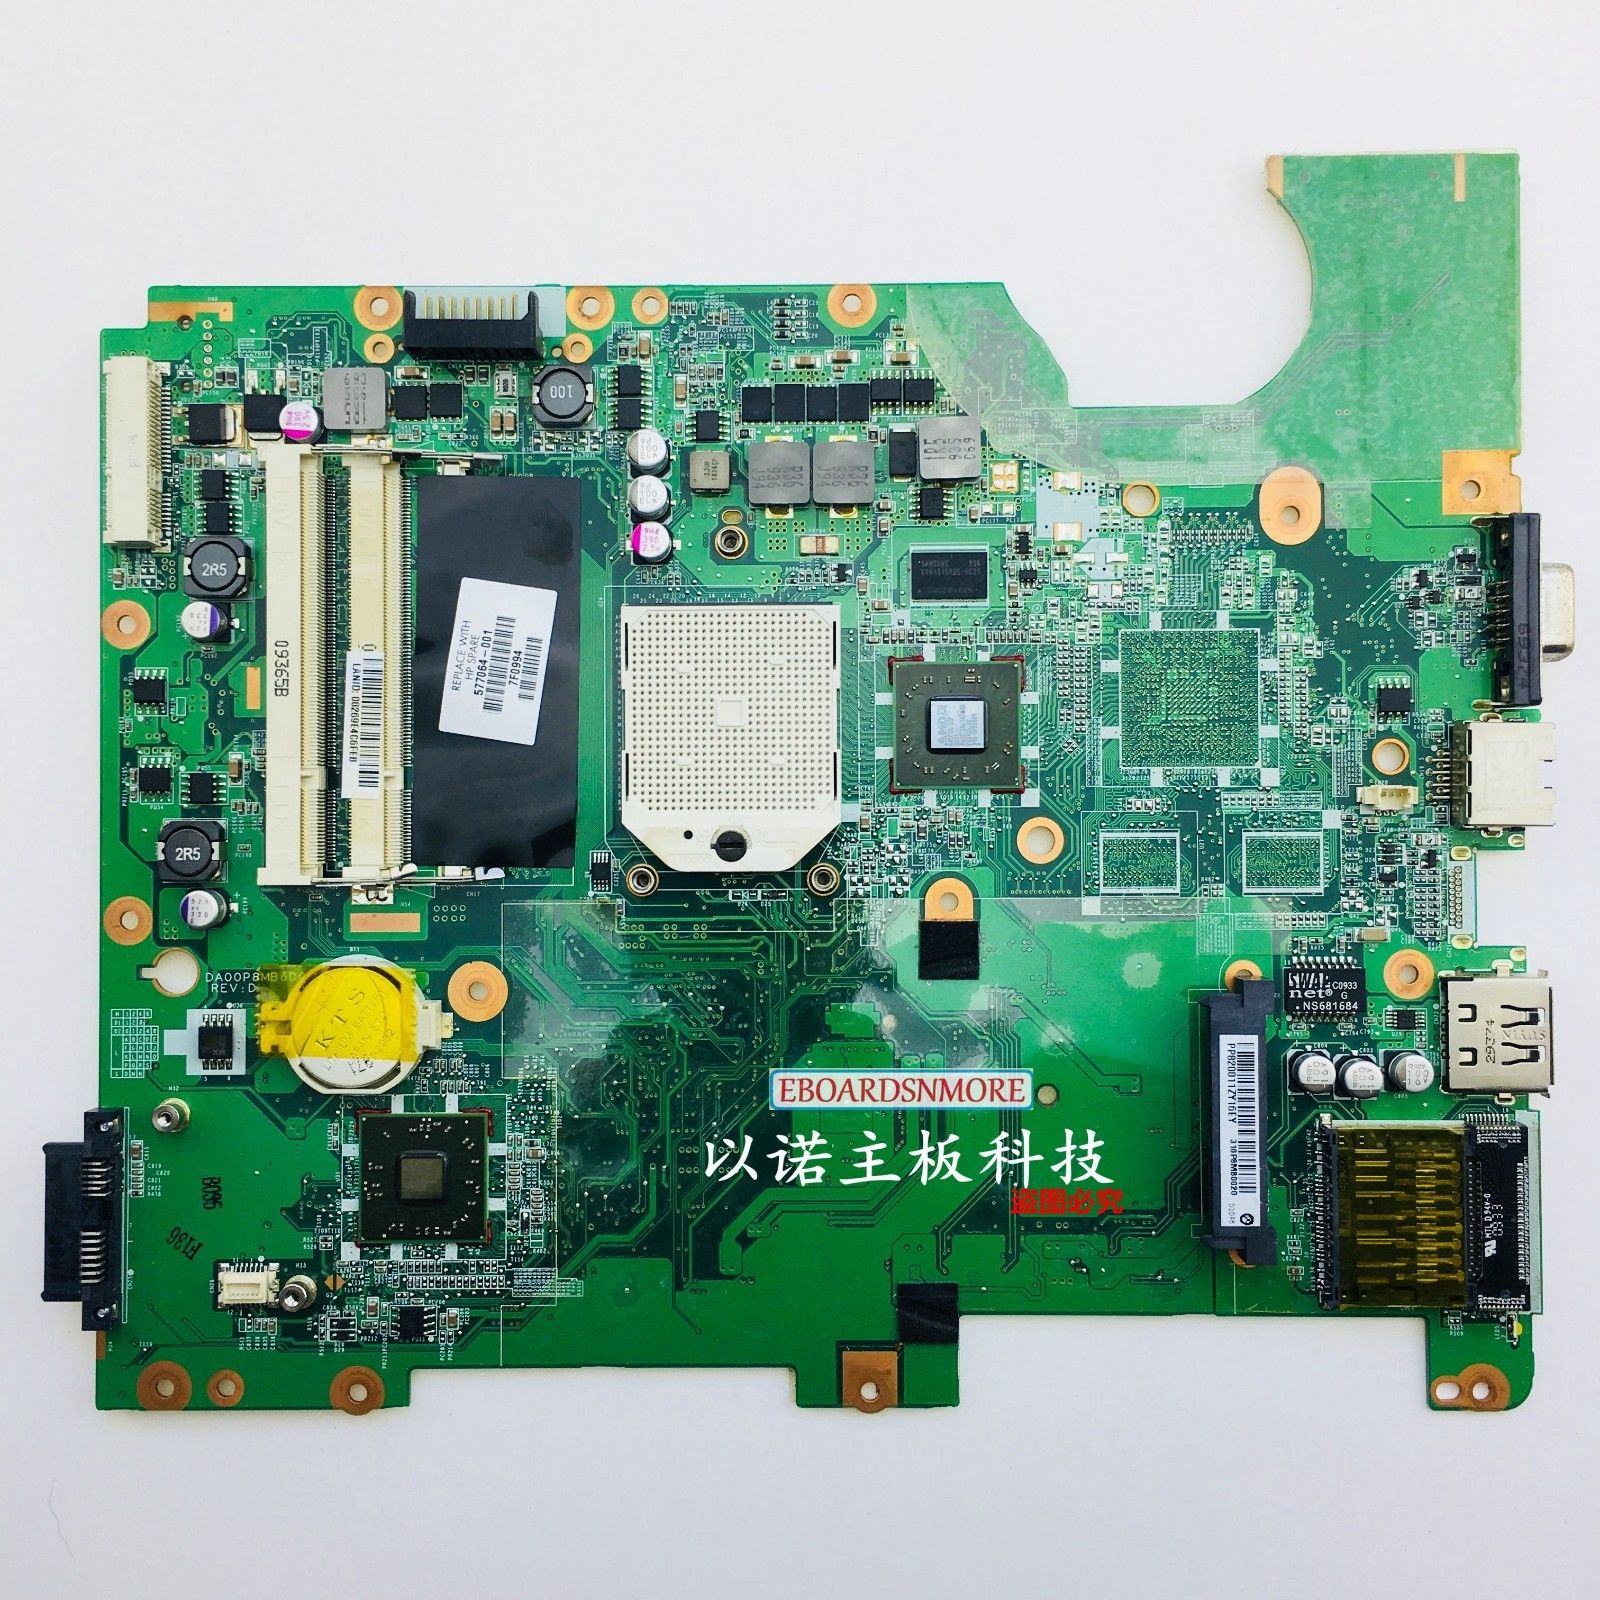 577065-001 for HP Compaq CQ61 G61 Laptop AMD Motherboard,Grade A Compatible CPU Brand: INTEL Number of Memor